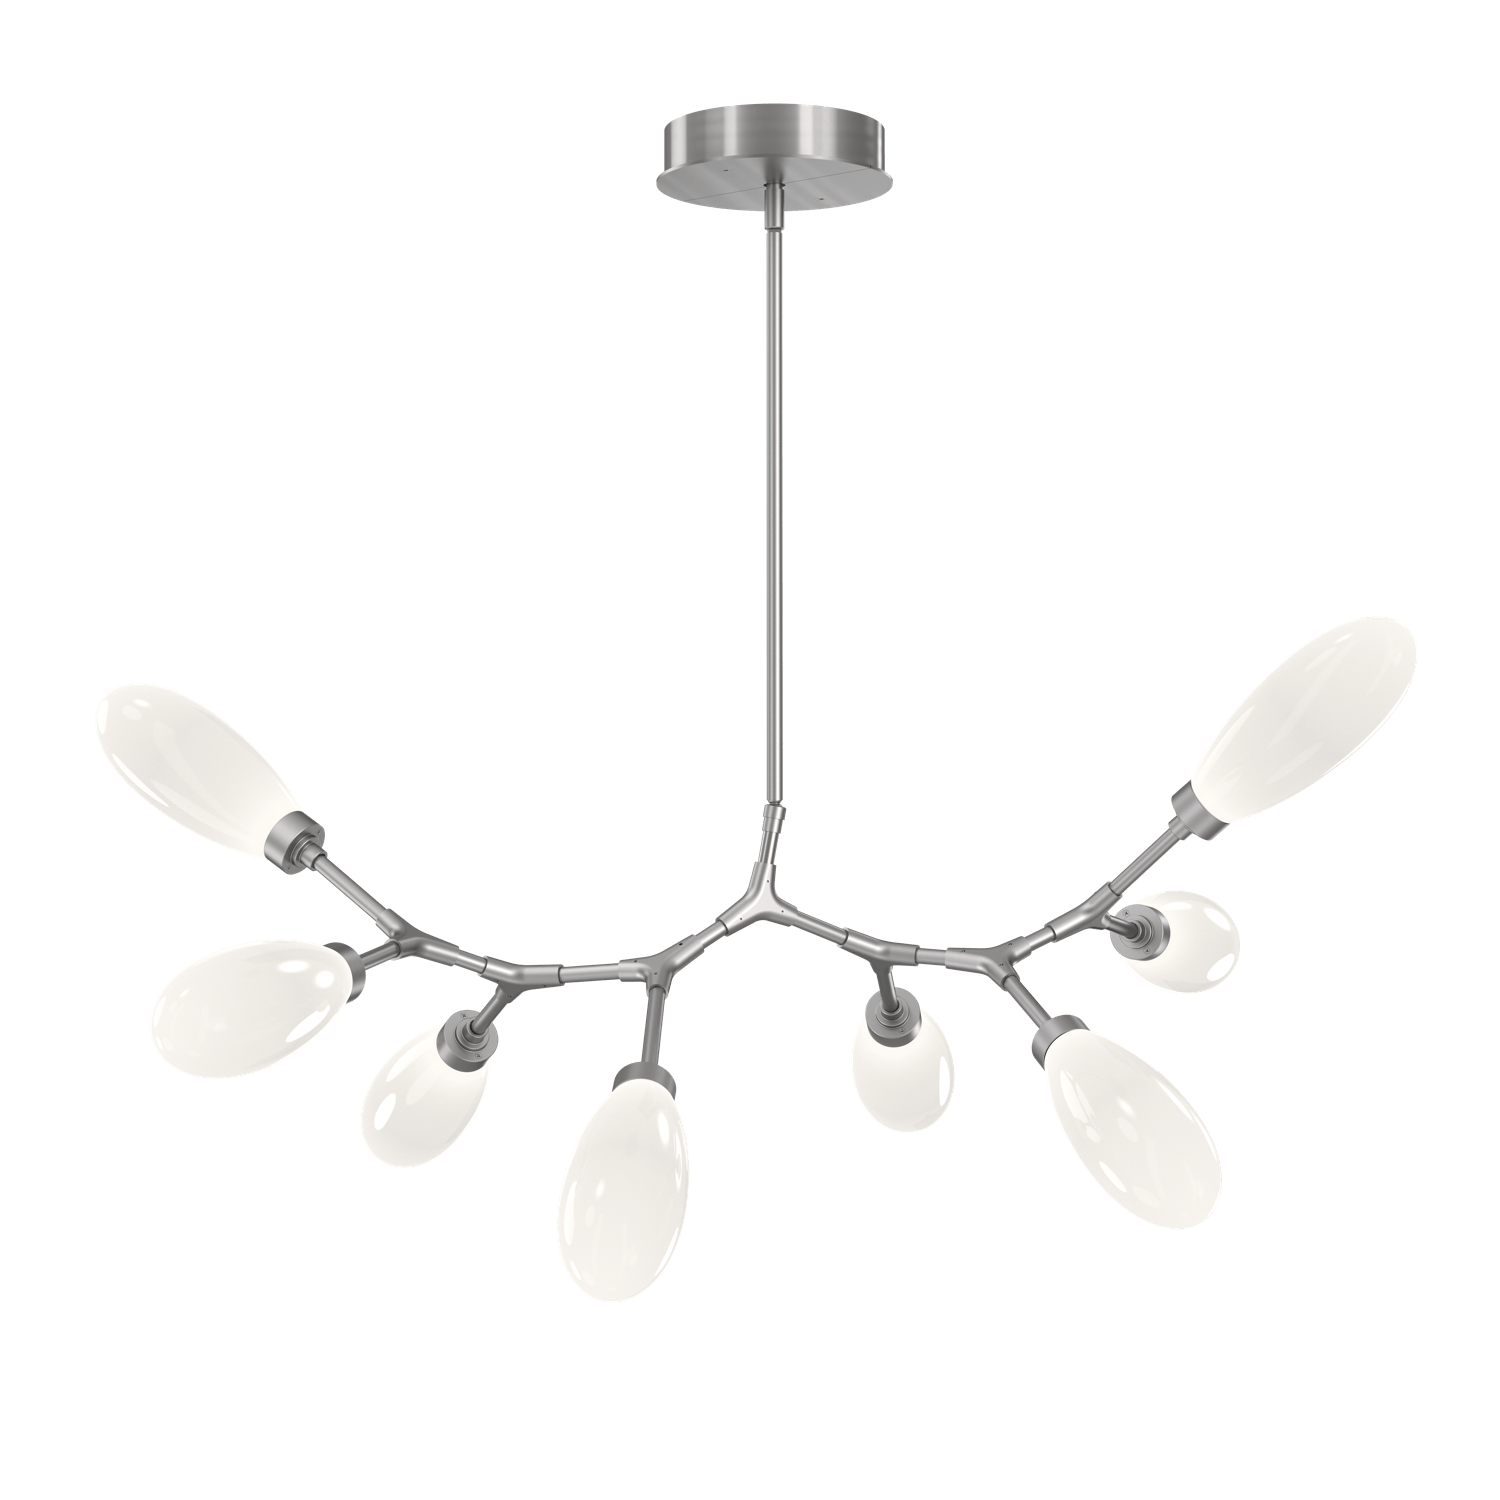 PLB0071-BB-SN-WL-LL-Hammerton-Studio-Fiori-8-light-organic-branch-chandelier-with-satin-nickel-finish-and-opal-white-glass-shades-and-LED-lamping